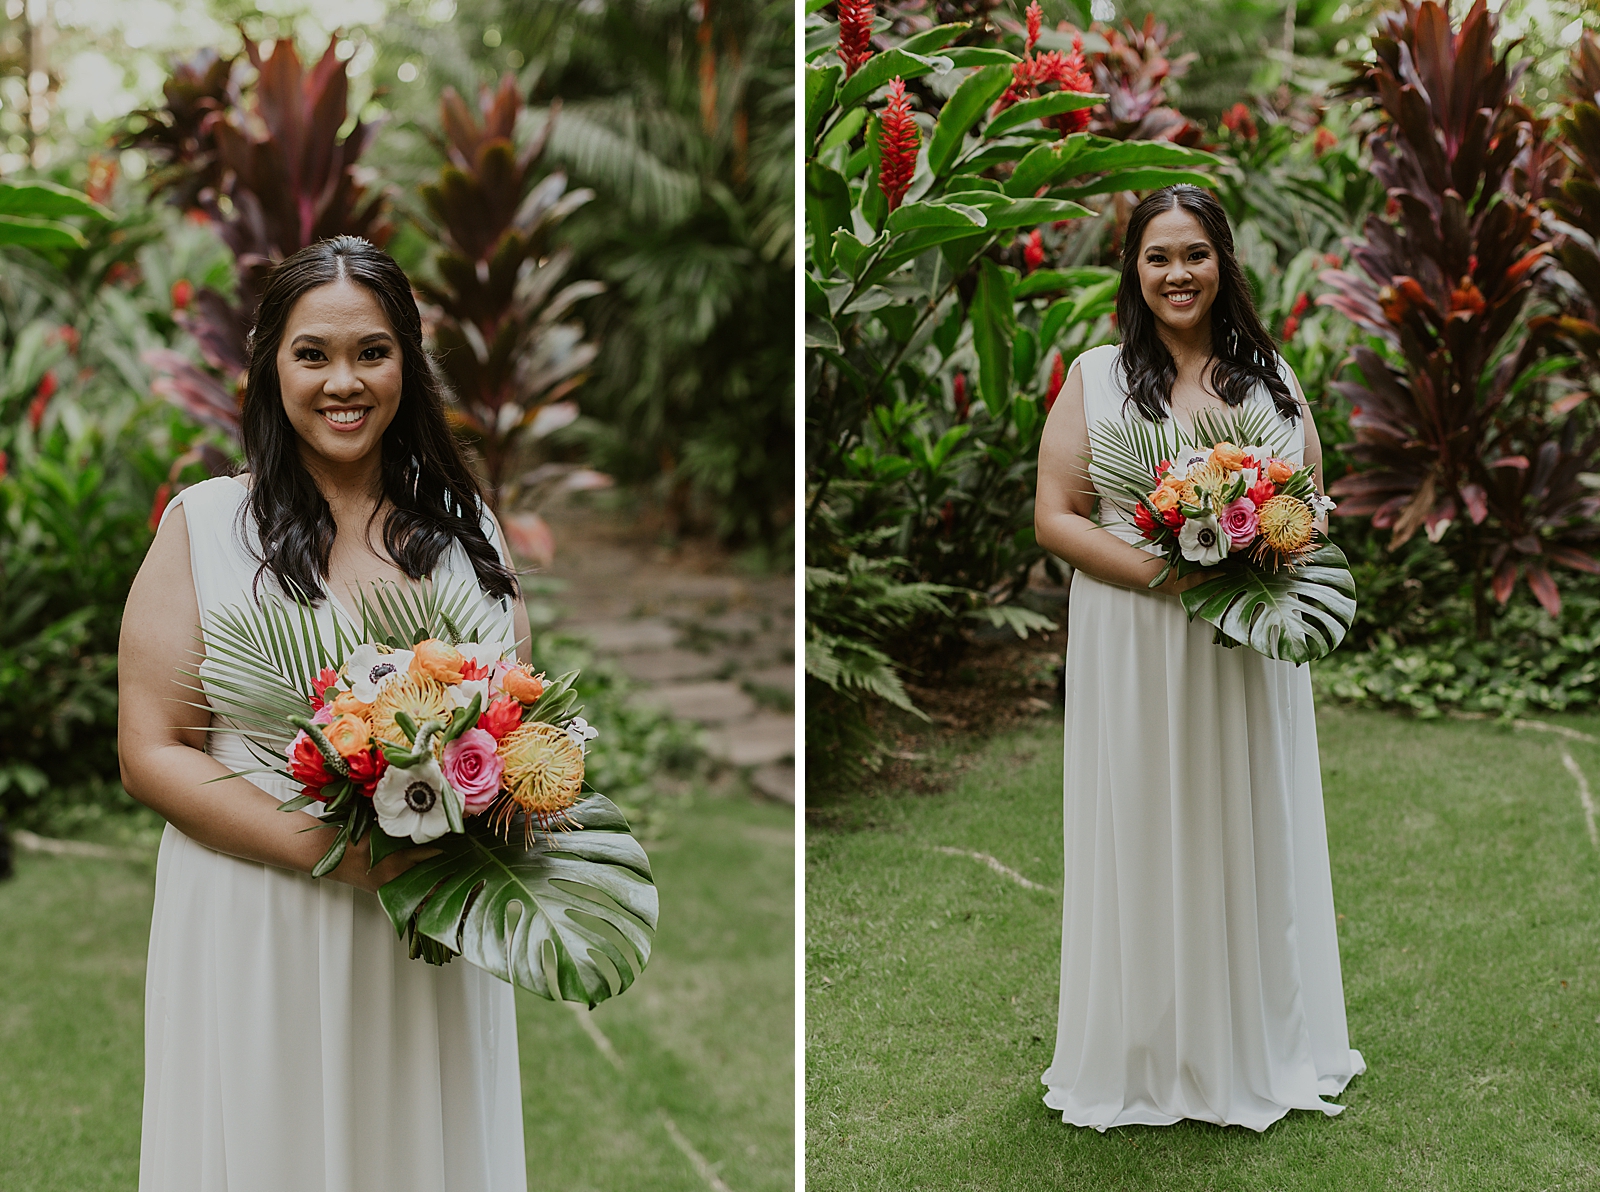 Bride with tropical bouquet out in green garden area